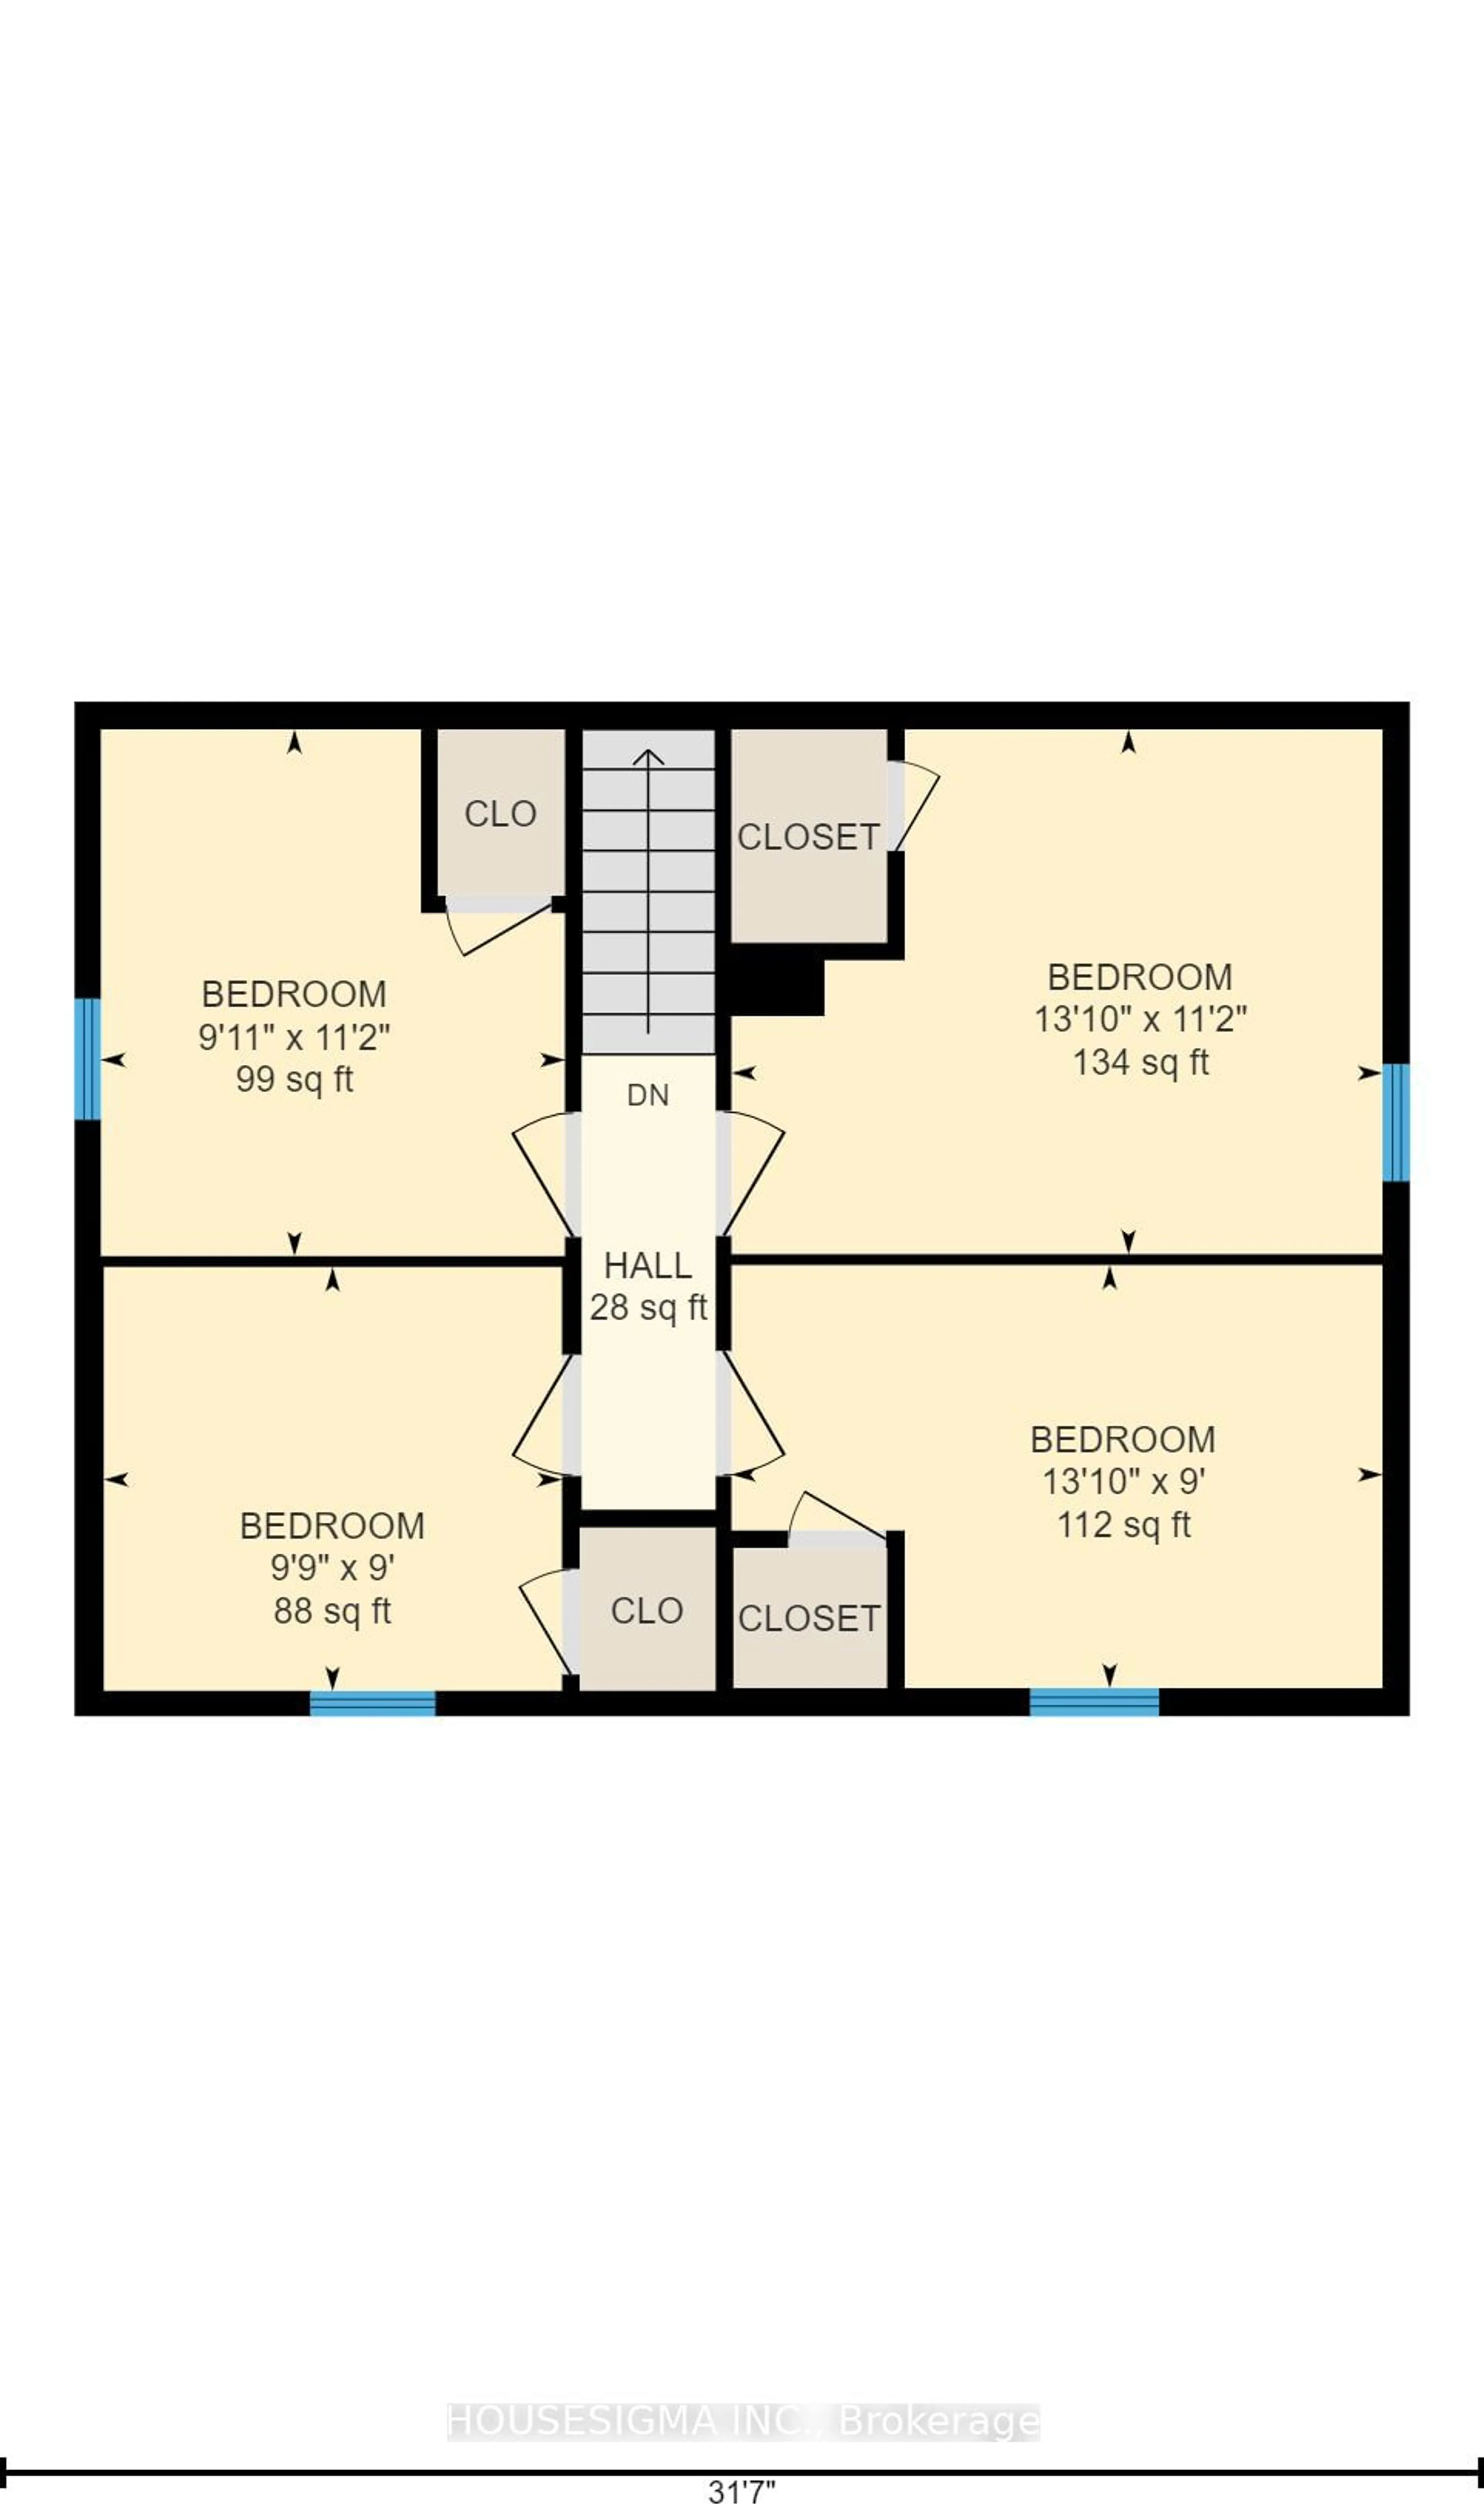 Floor plan for 11 Elmwood Ave, St. Catharines Ontario L2R 2T5